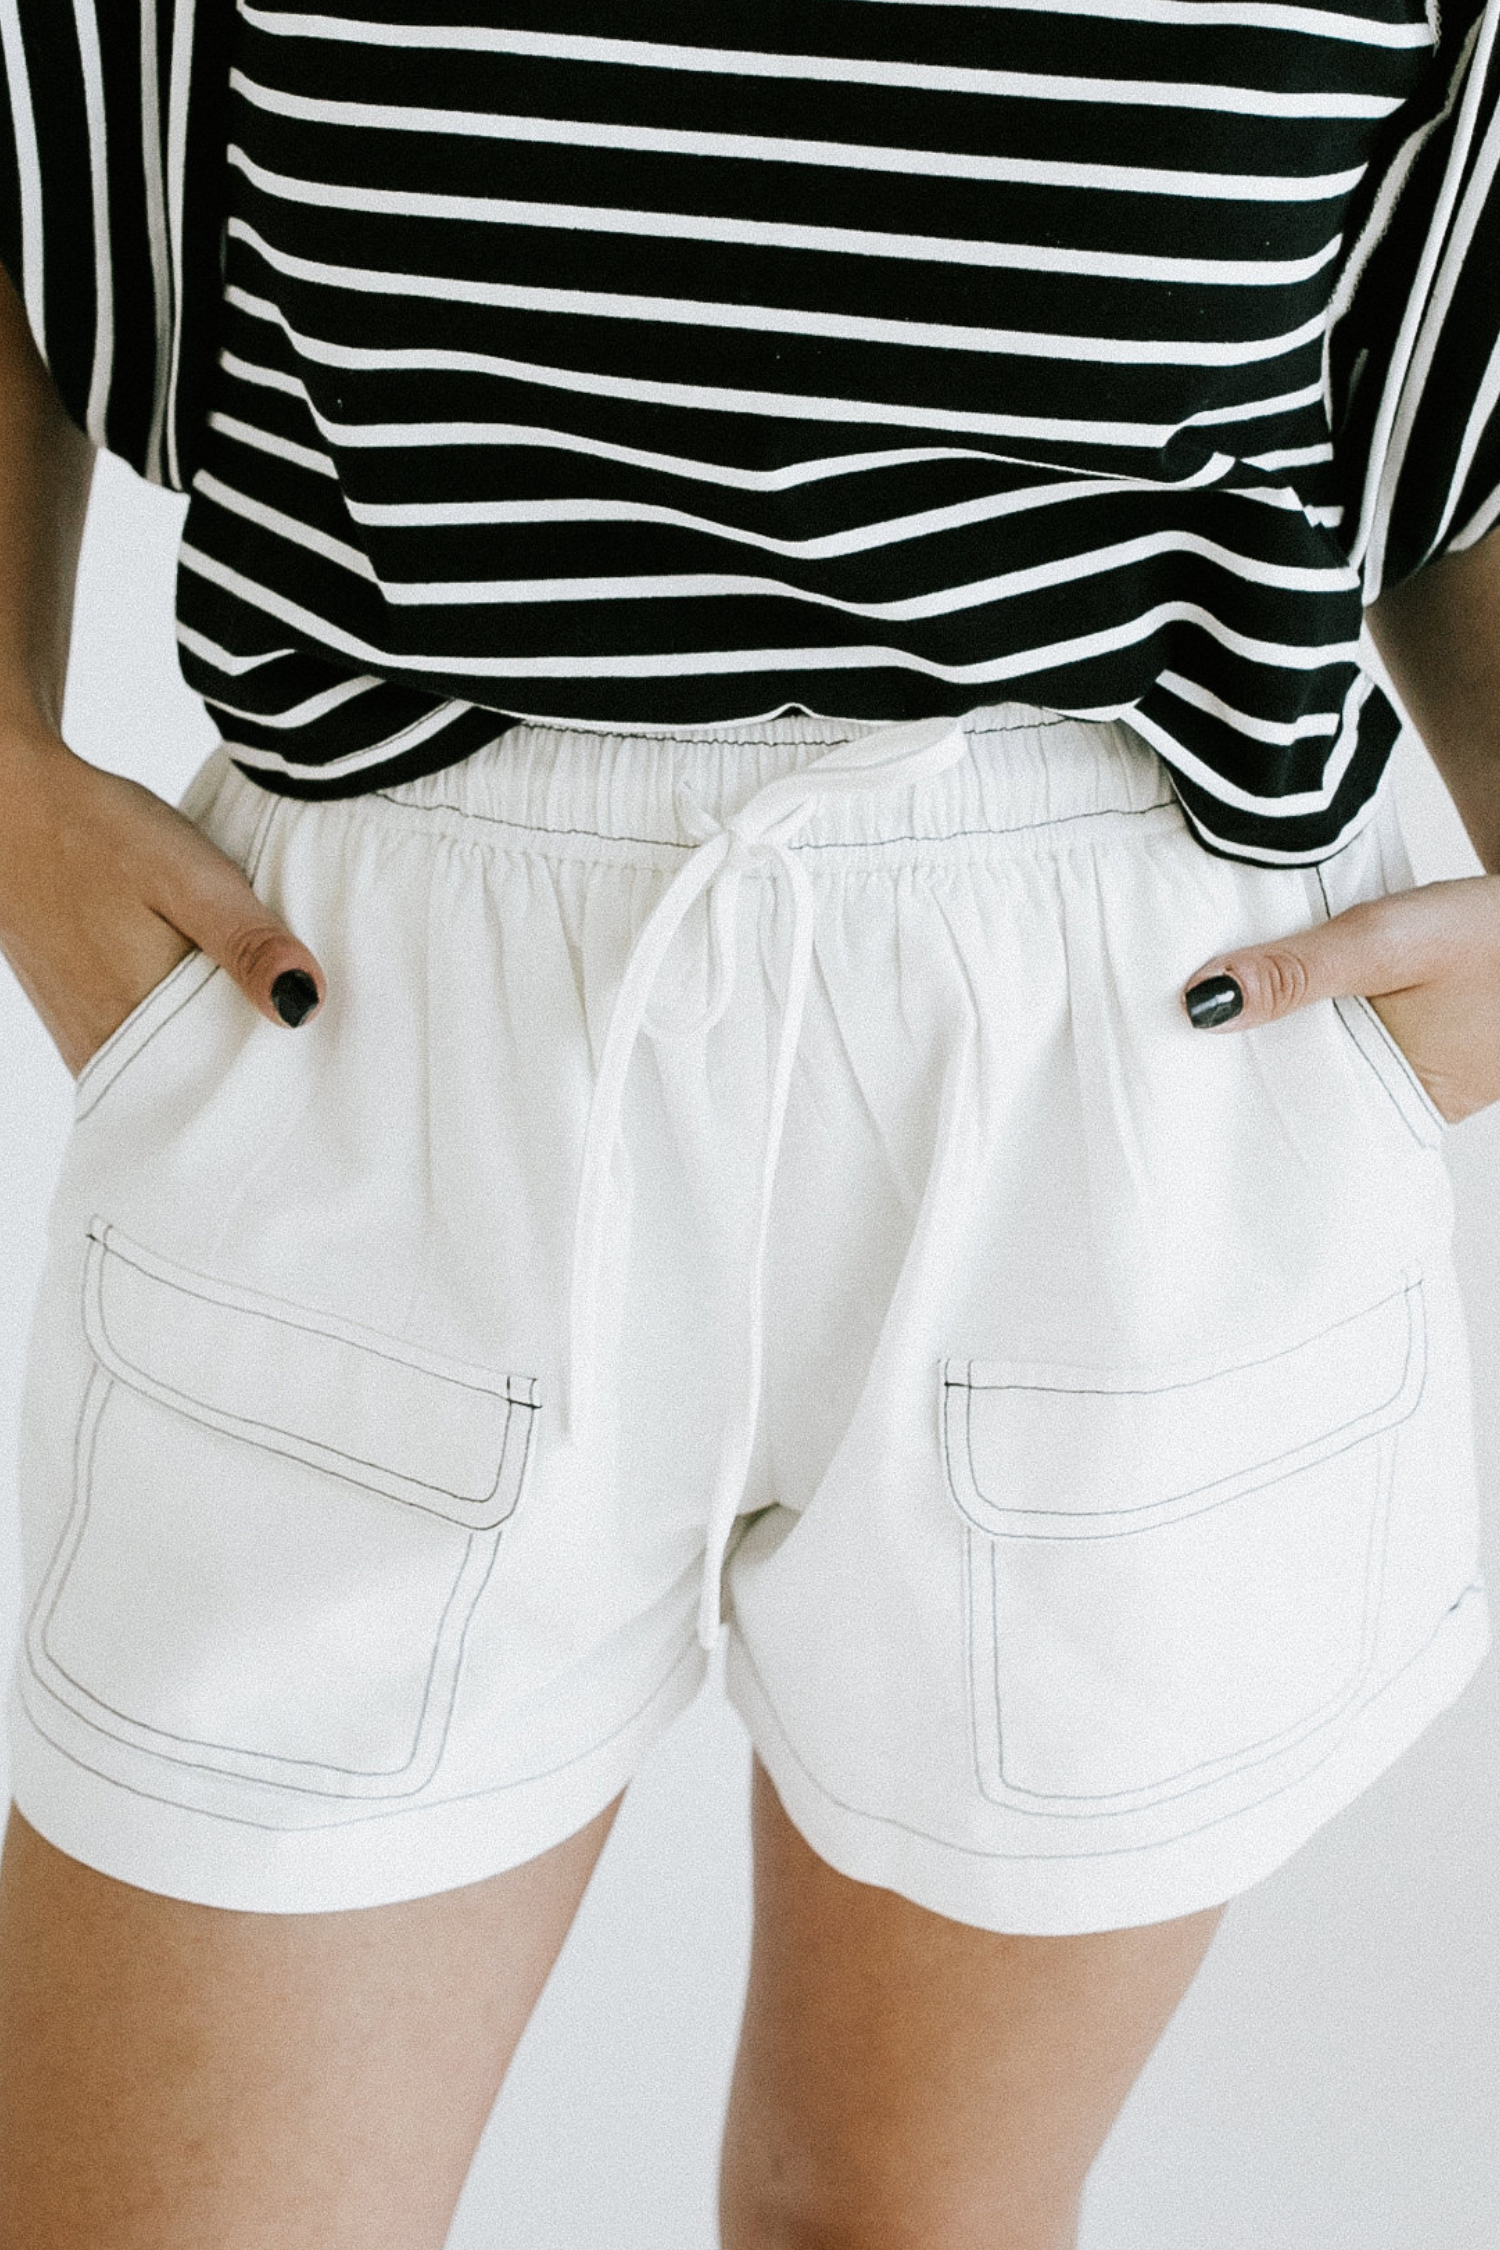 Out Of Town Shorts - White